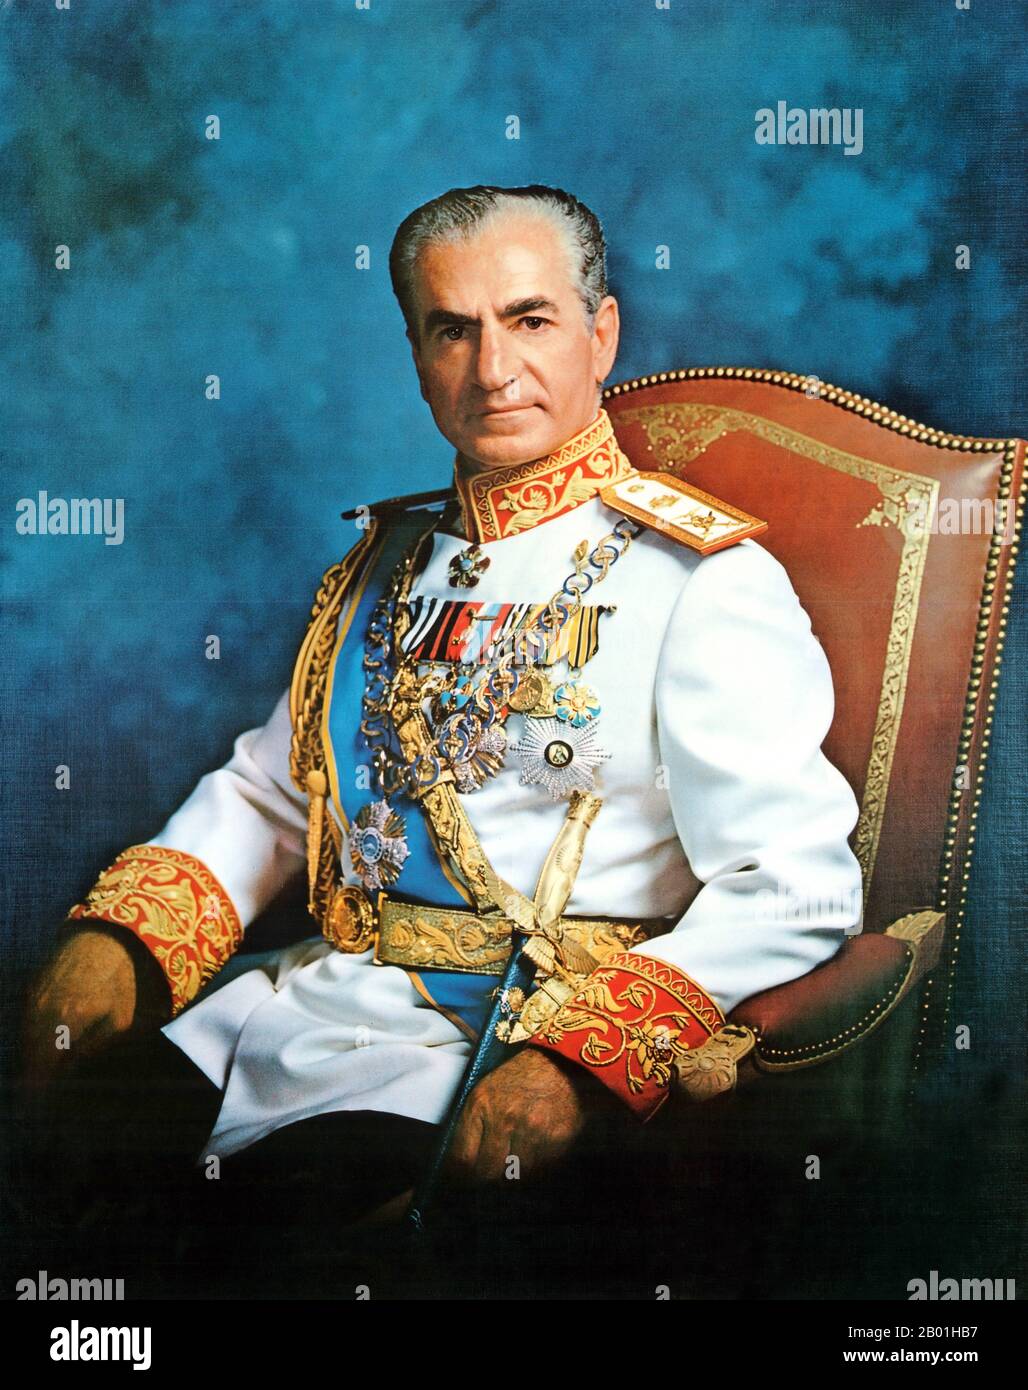 Iran/Persia: Official portrait of Mohammad Rezā Shāh Pahlavi (26 October 1919 – 27 July 1980), Shah of Iran, Shah of Persia (r. 1941-1979), 1973.  Mohammad Rezā Shāh Pahlavi ruled Iran from 16 September 1941 until his overthrow by the Iranian Revolution on 11 February 1979. He was the second and last monarch of the House of Pahlavi of the Iranian monarchy.  Mohammad Reza Shah came to power during World War II after an Anglo-Soviet invasion forced the abdication of his father Reza Shah. During his reign, the Iranian oil industry was nationalised under Prime Minister Mohammad Mosaddegh. Stock Photo